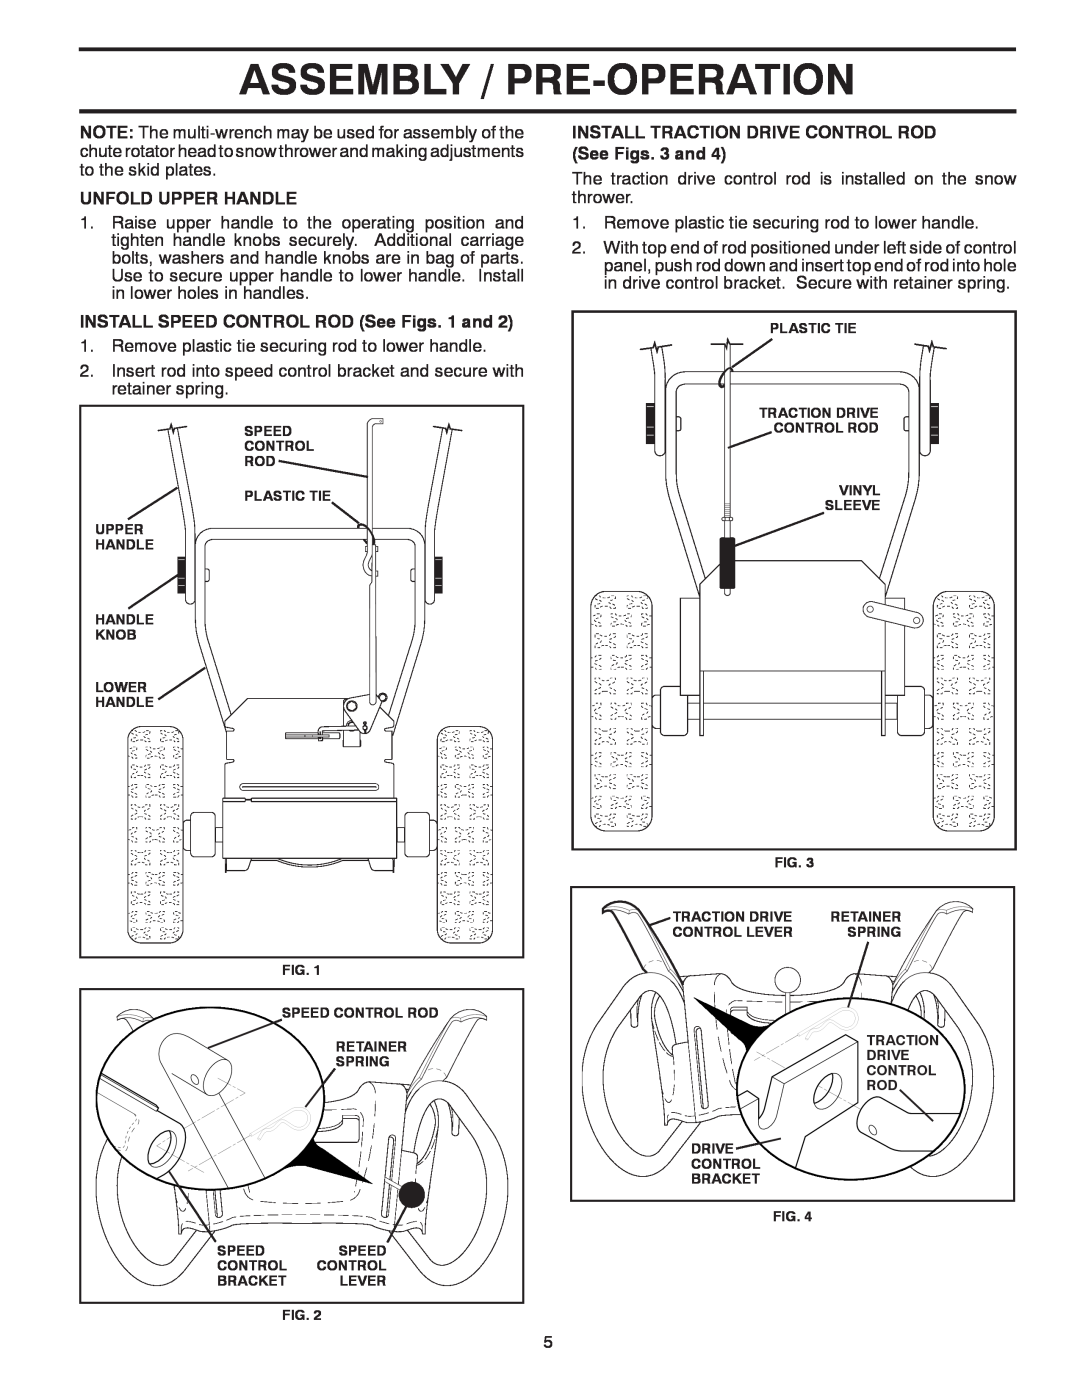 Poulan 96192003801 Assembly / Pre-Operation, Unfold Upper Handle, INSTALL SPEED CONTROL ROD See Figs. 1 and, Plastic Tie 